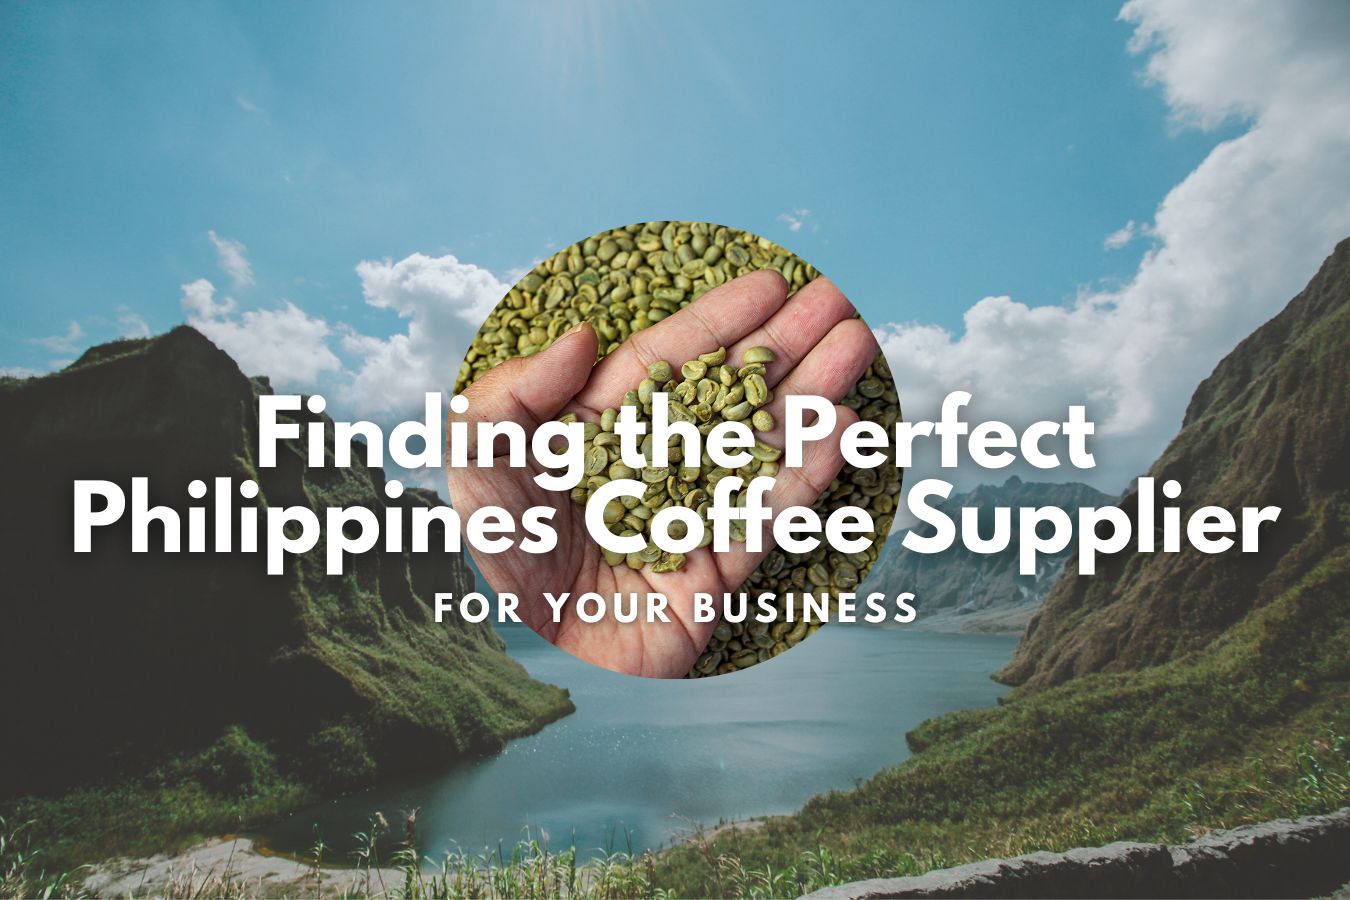 Finding the Perfect Philippines Coffee Supplier for Your Business